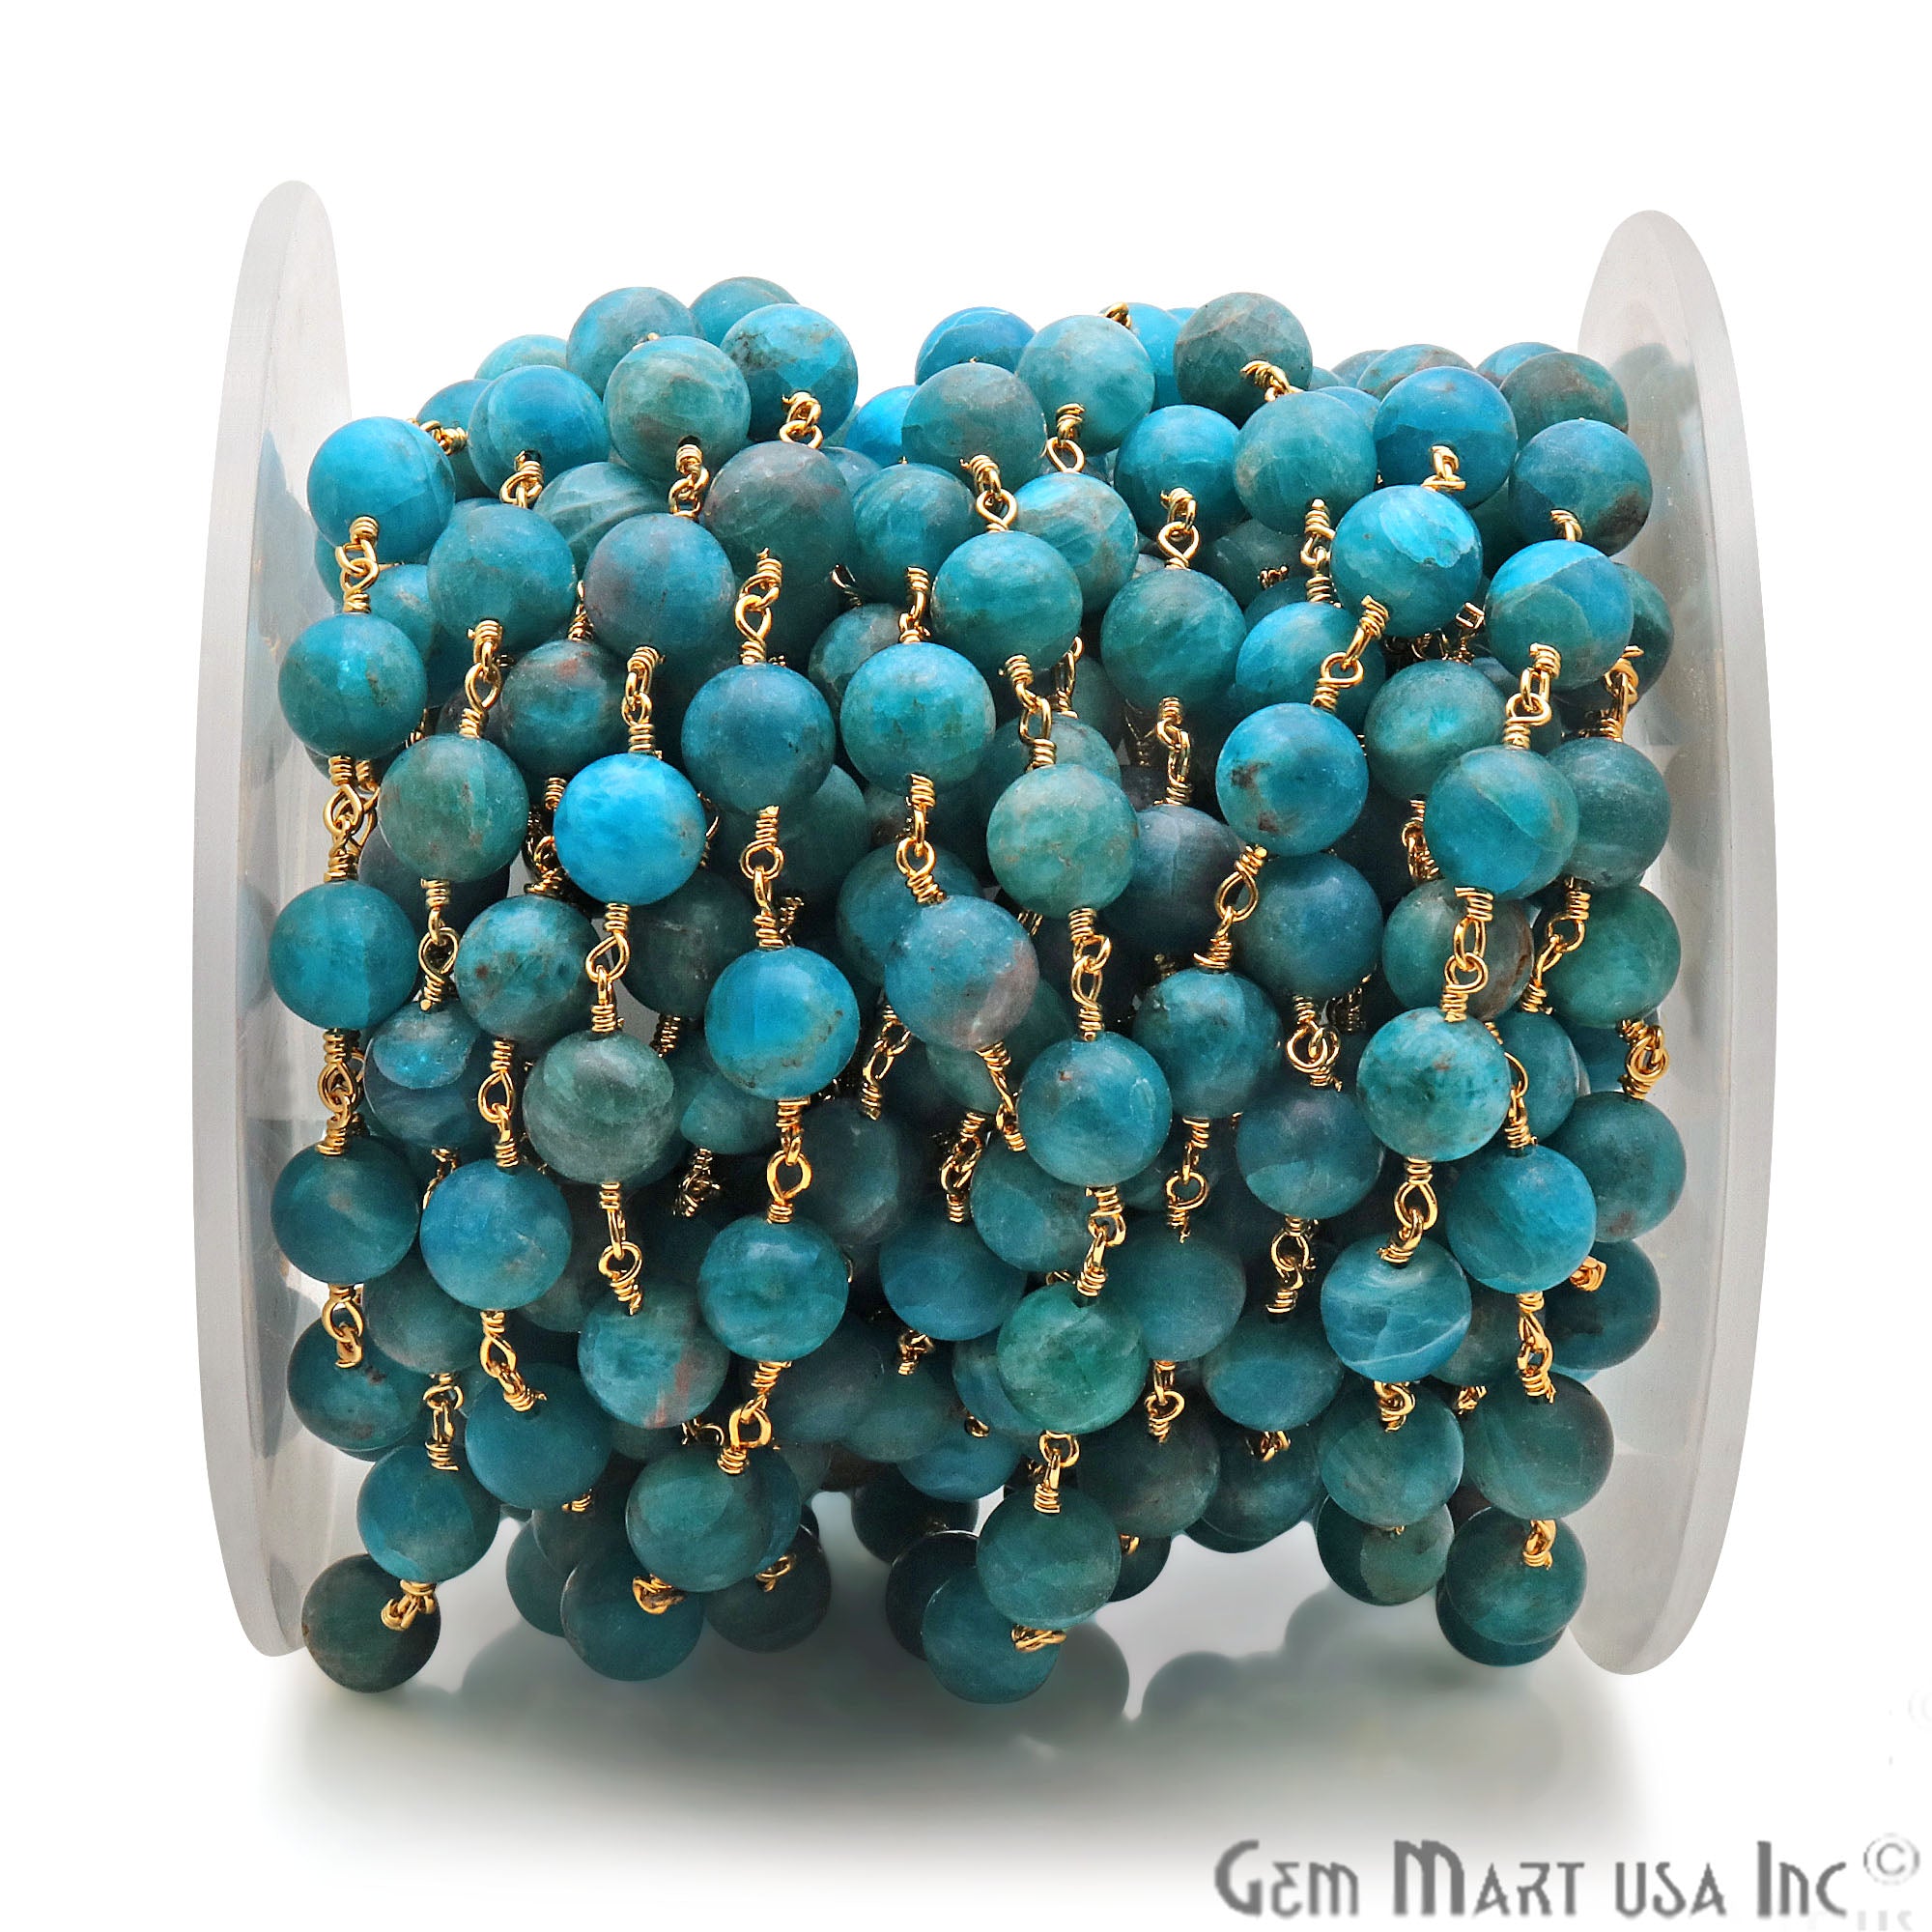 Neon Apatite Smooth Beads 8mm Gold Plated Wire Wrapped Gemstone Rosary Chain - GemMartUSA